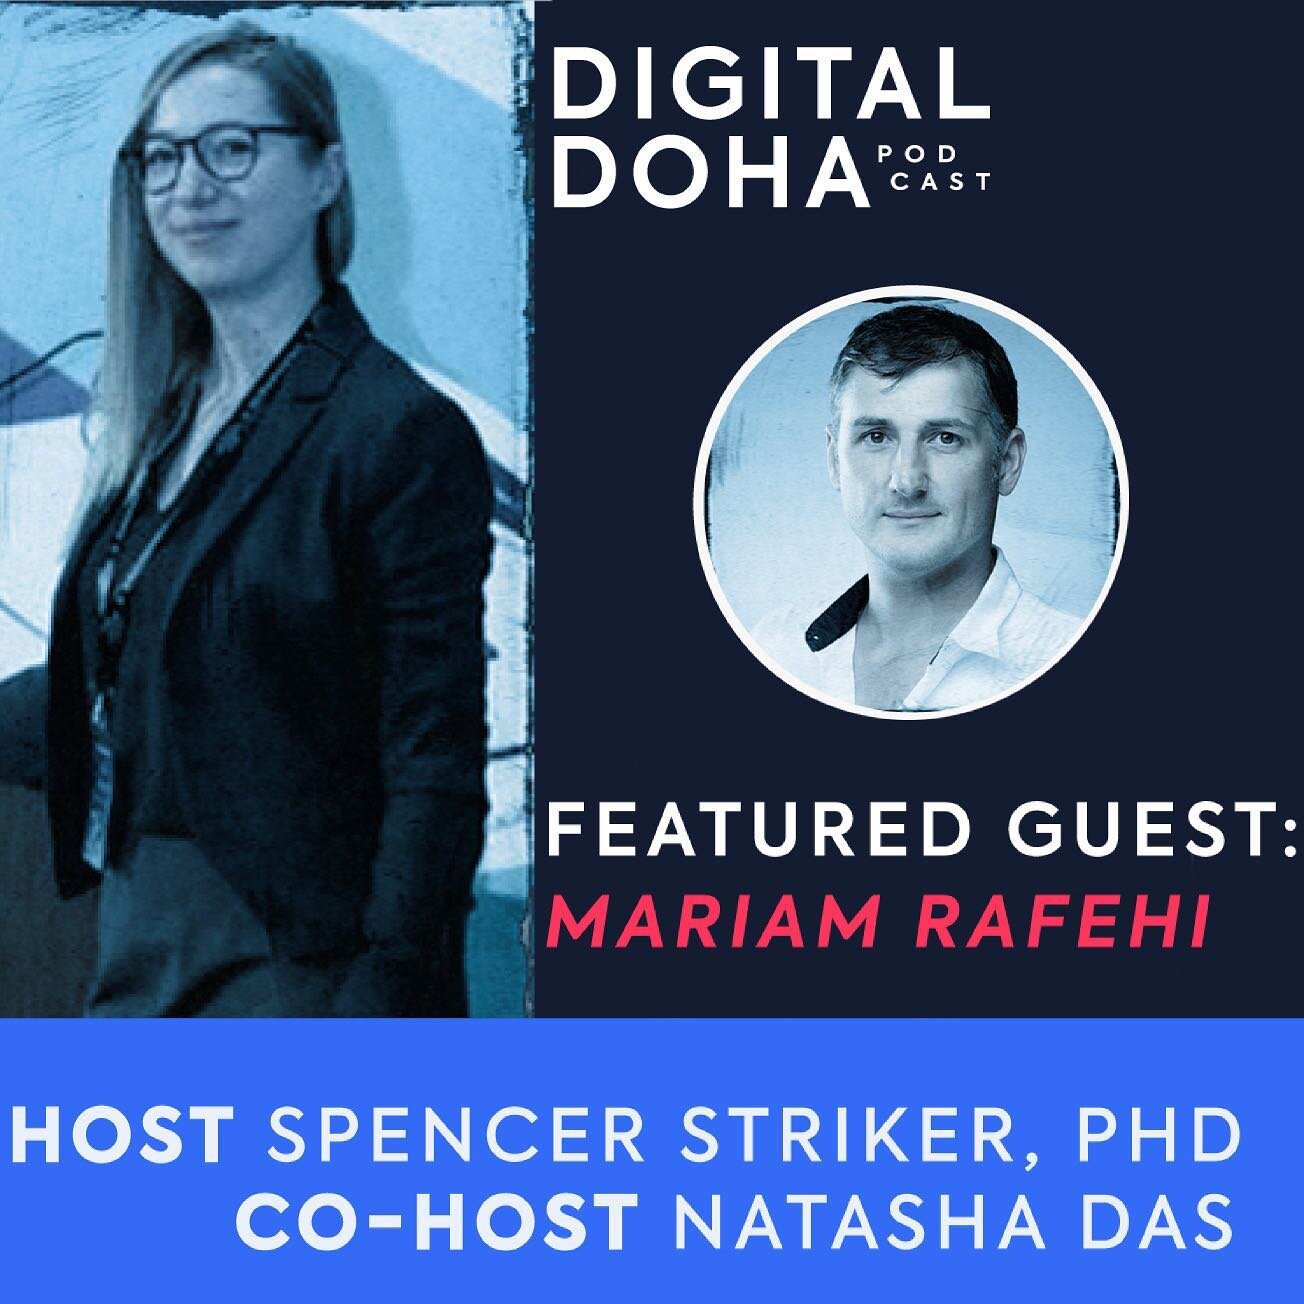 The Digital Doha Podcast is back with Ep 3: &ldquo;Synesthesia&rdquo; feat. Mariam Rafehi @im.me.mi leading innovator in VR Design! 

The newest in our series focused on bringing listeners informative conversations with Qatar-based experts exploring 